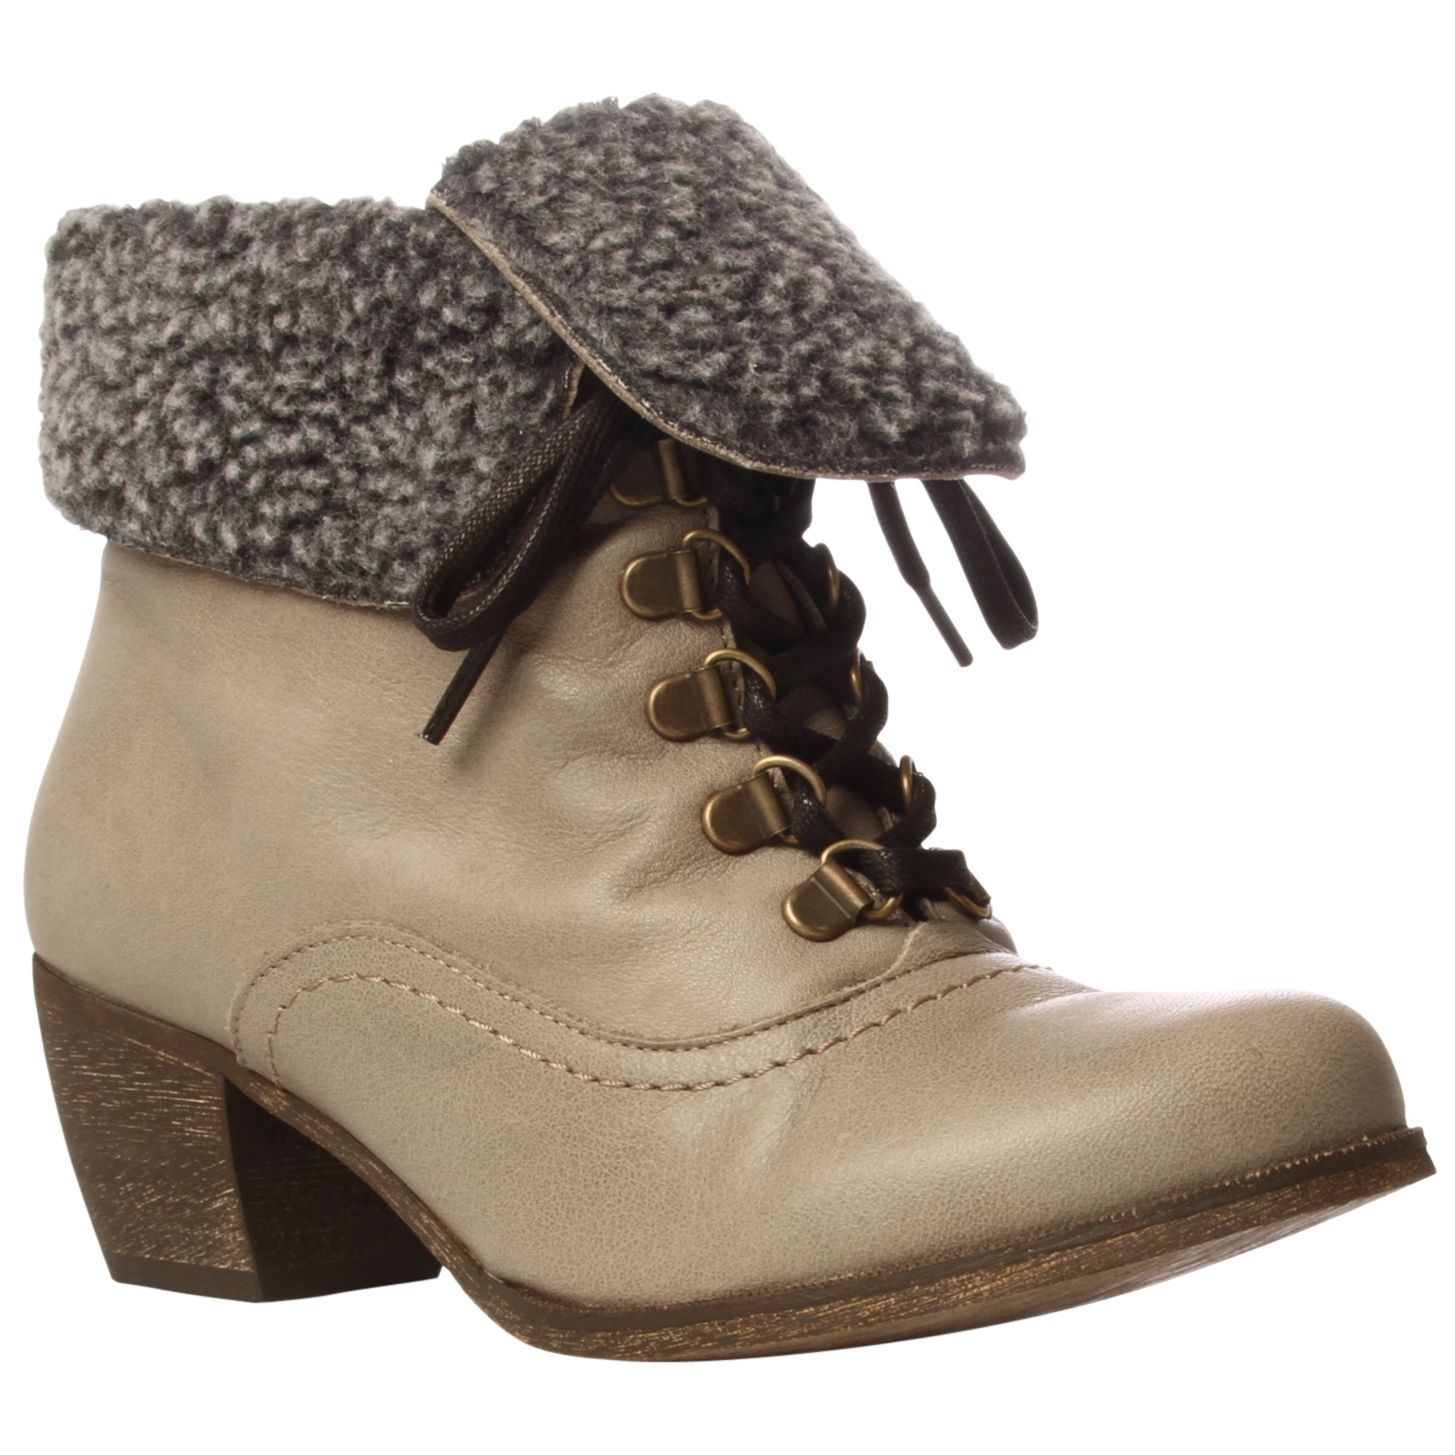 KG by Kurt Geiger Warrick Ankle Boots, Taupe at John Lewis